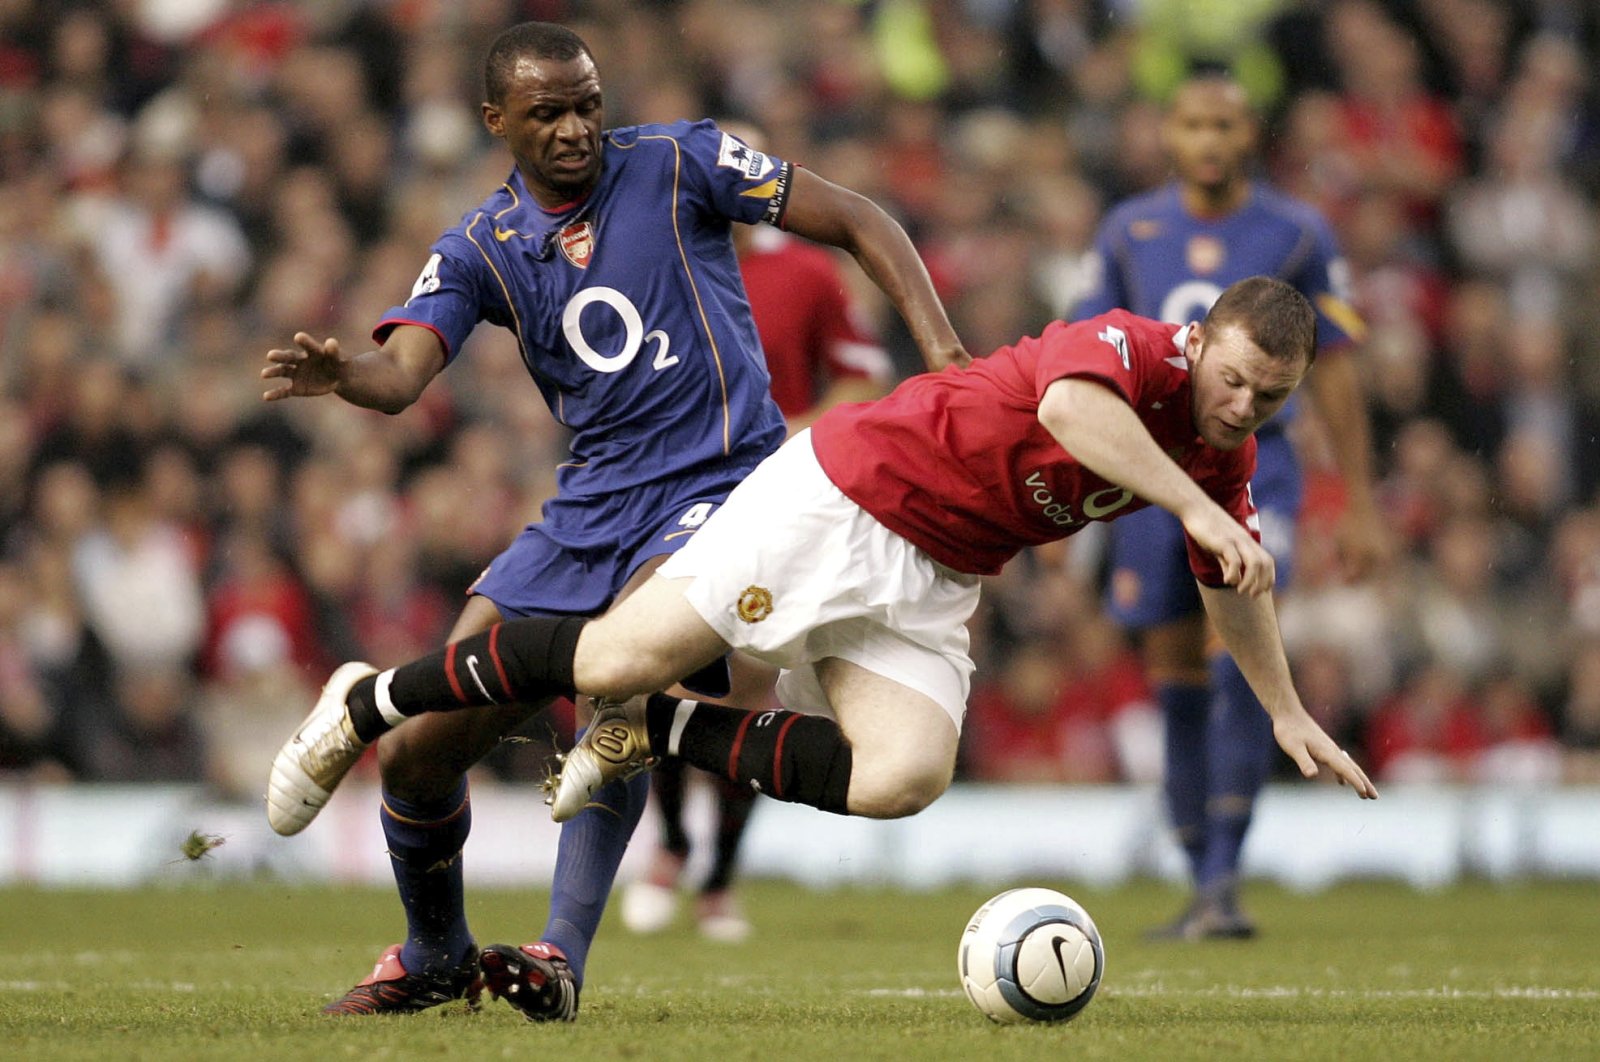 Man Utd&#039;s Wayne Rooney (R) tumbles over after a challenge by Arsenal&#039;s Patrick Vieira during a Premier League match, Manchester, England, Oct. 24, 2004.